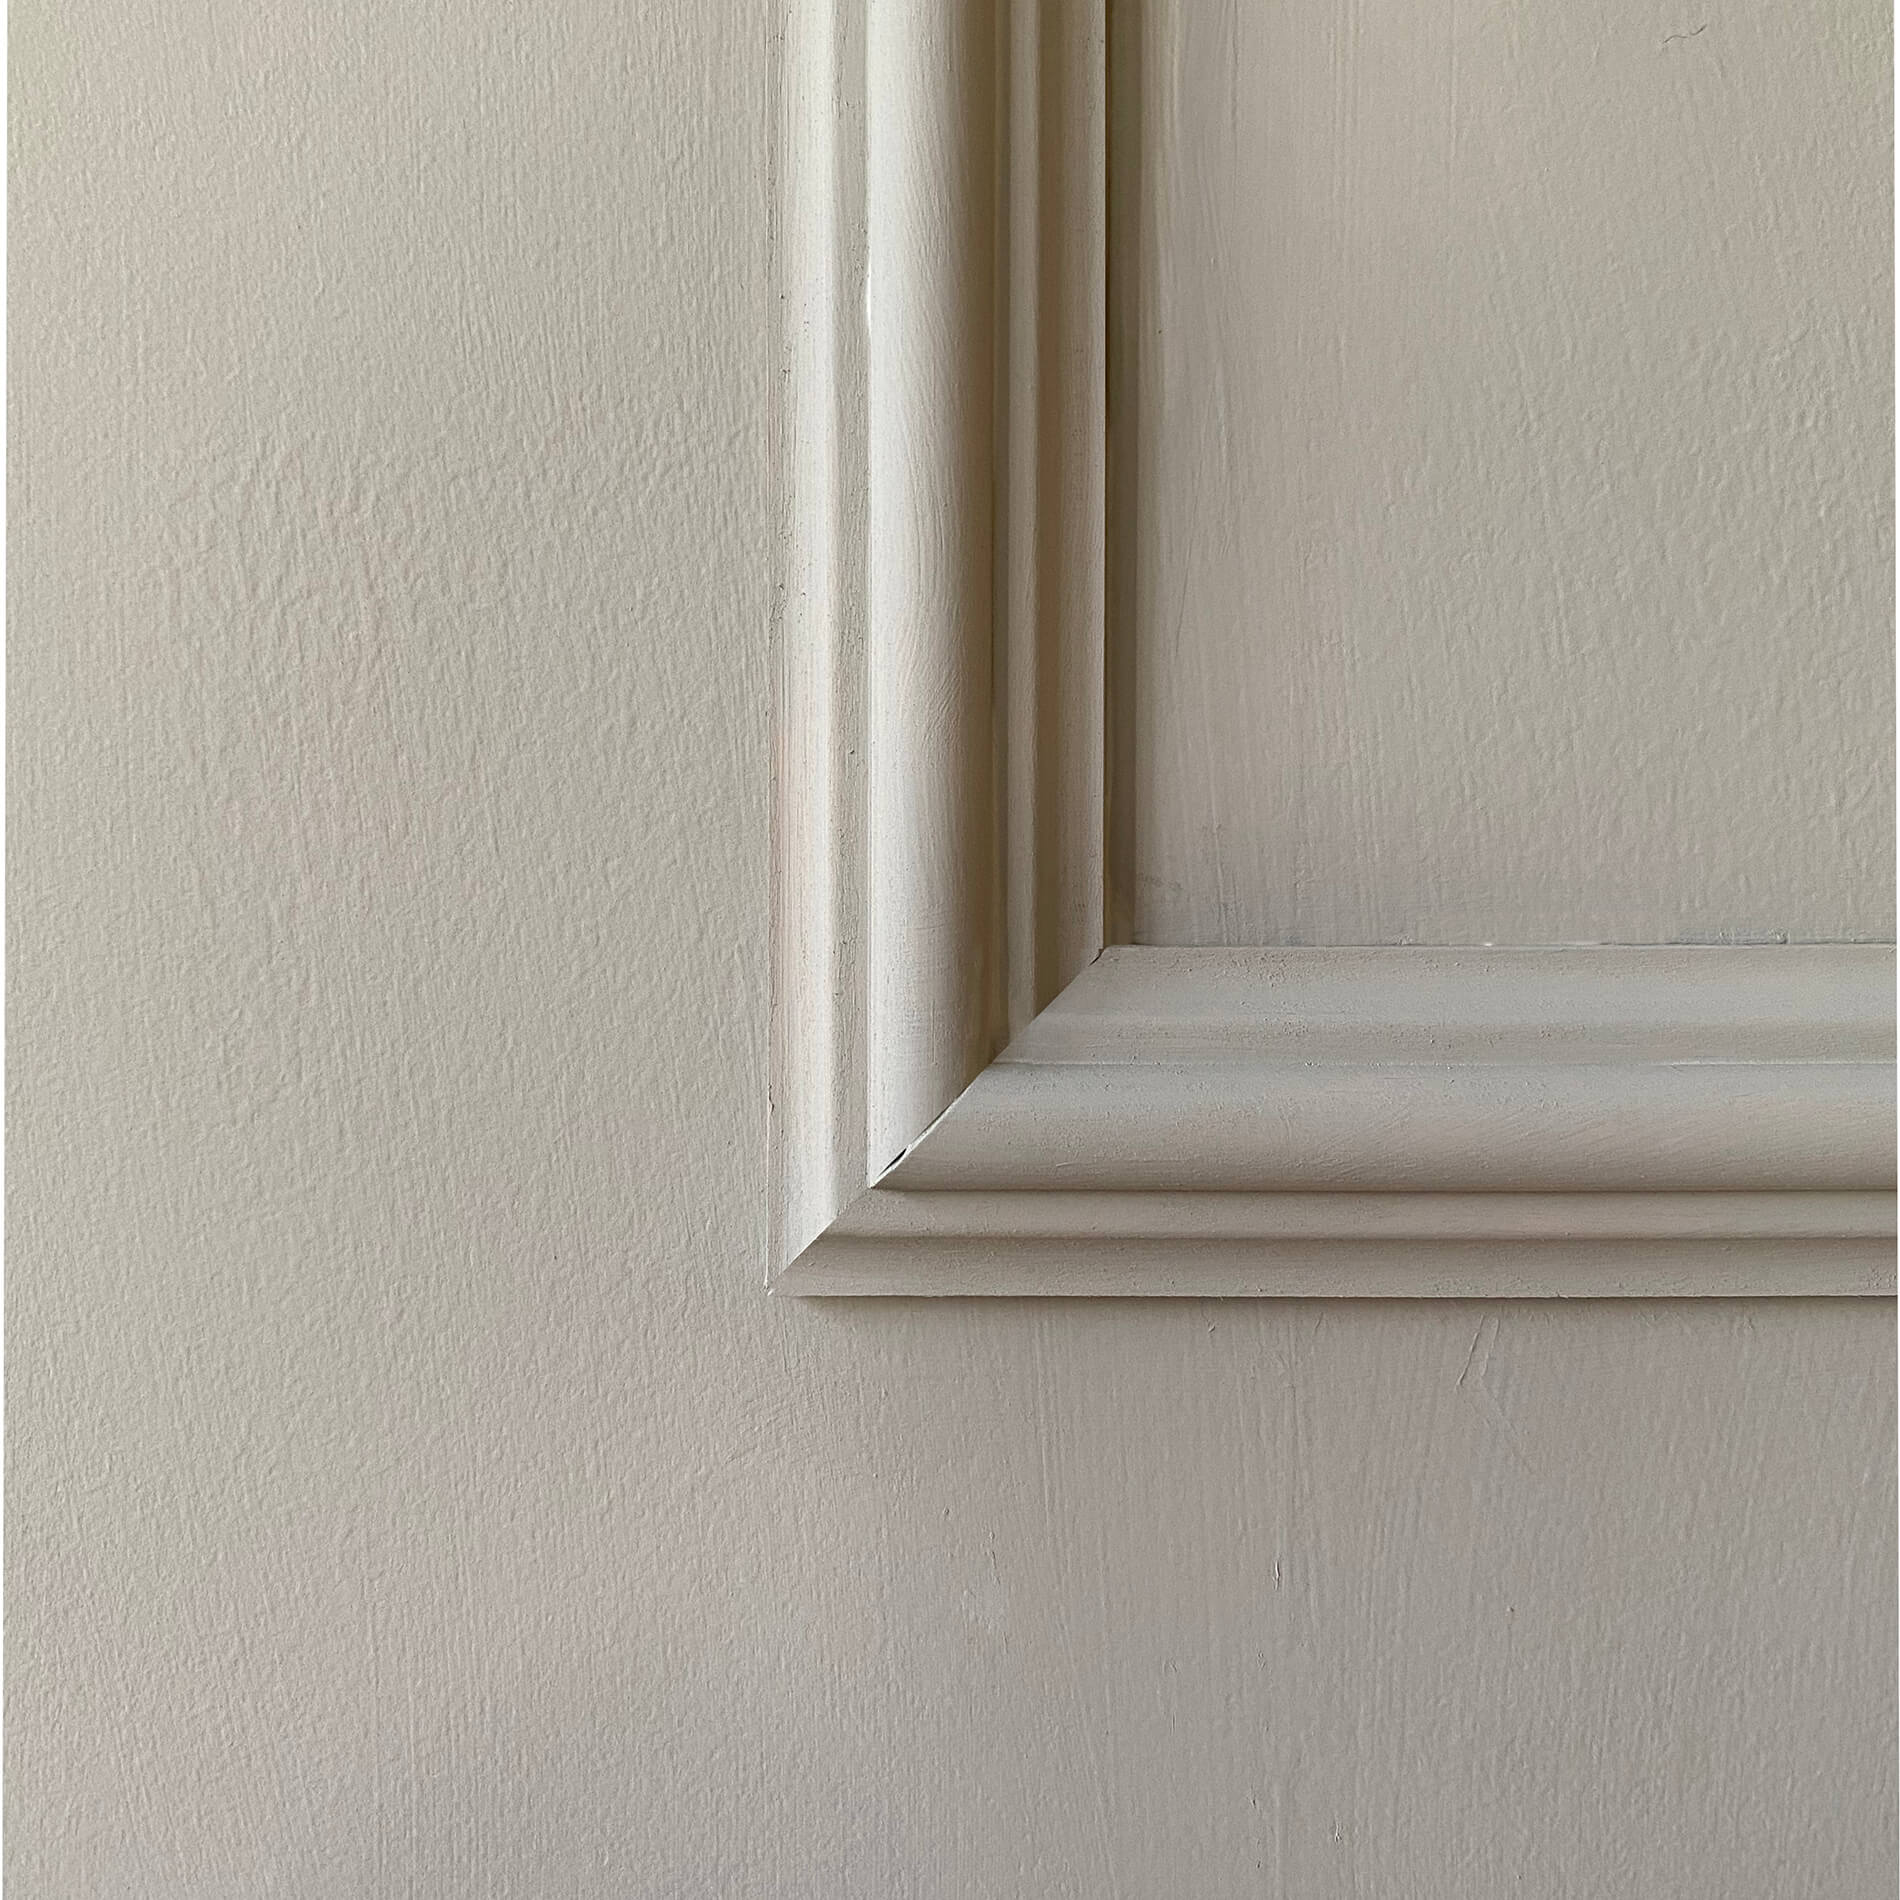 Classic Bead moulding for wall panelling